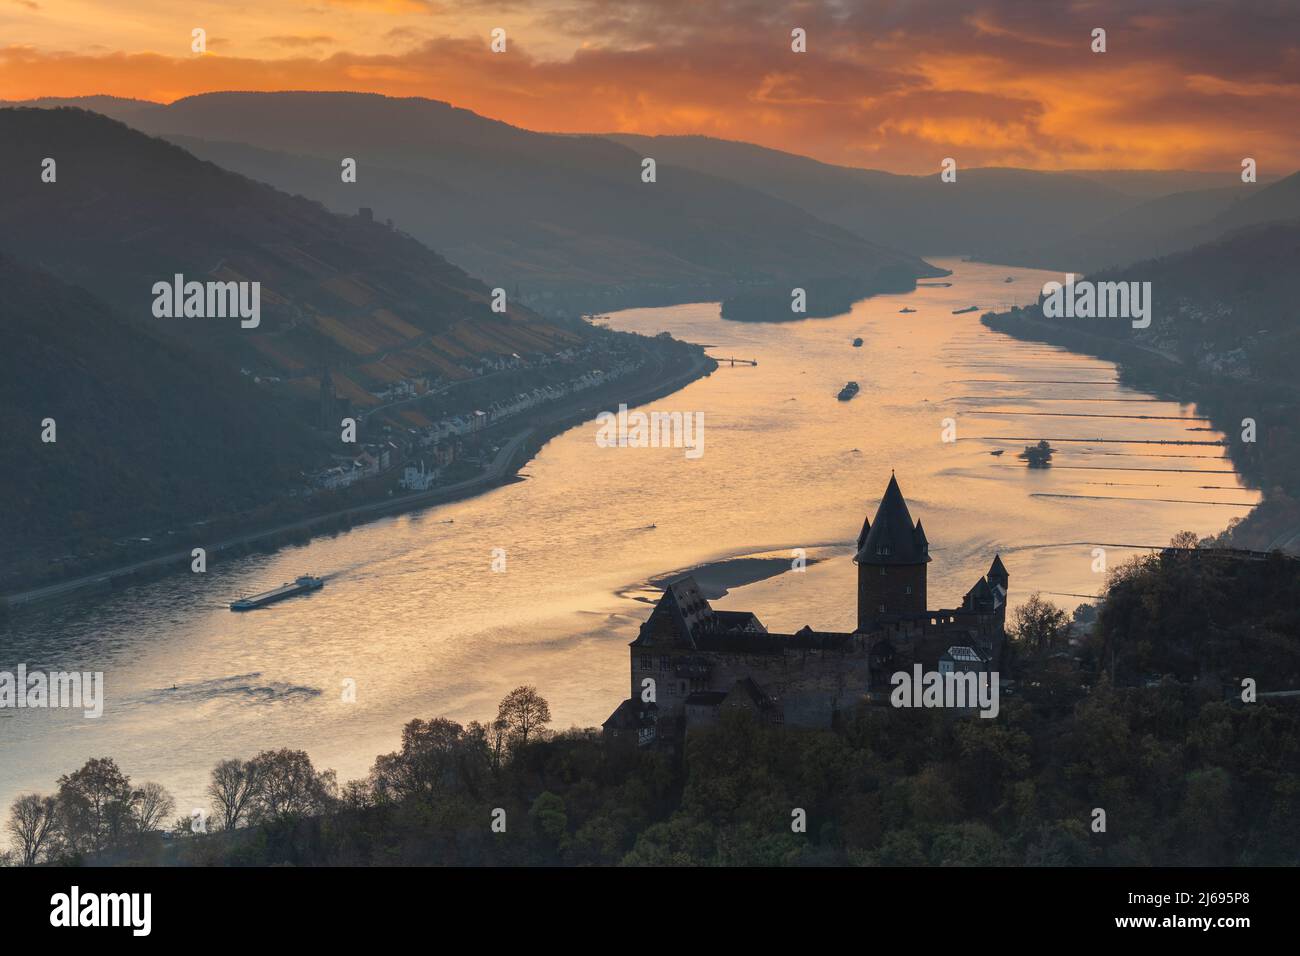 Stahleck Castle and Rhein River, Bacharach, Upper Middle Rhine Valley, Rhineland-Palatinate, Germany Stock Photo